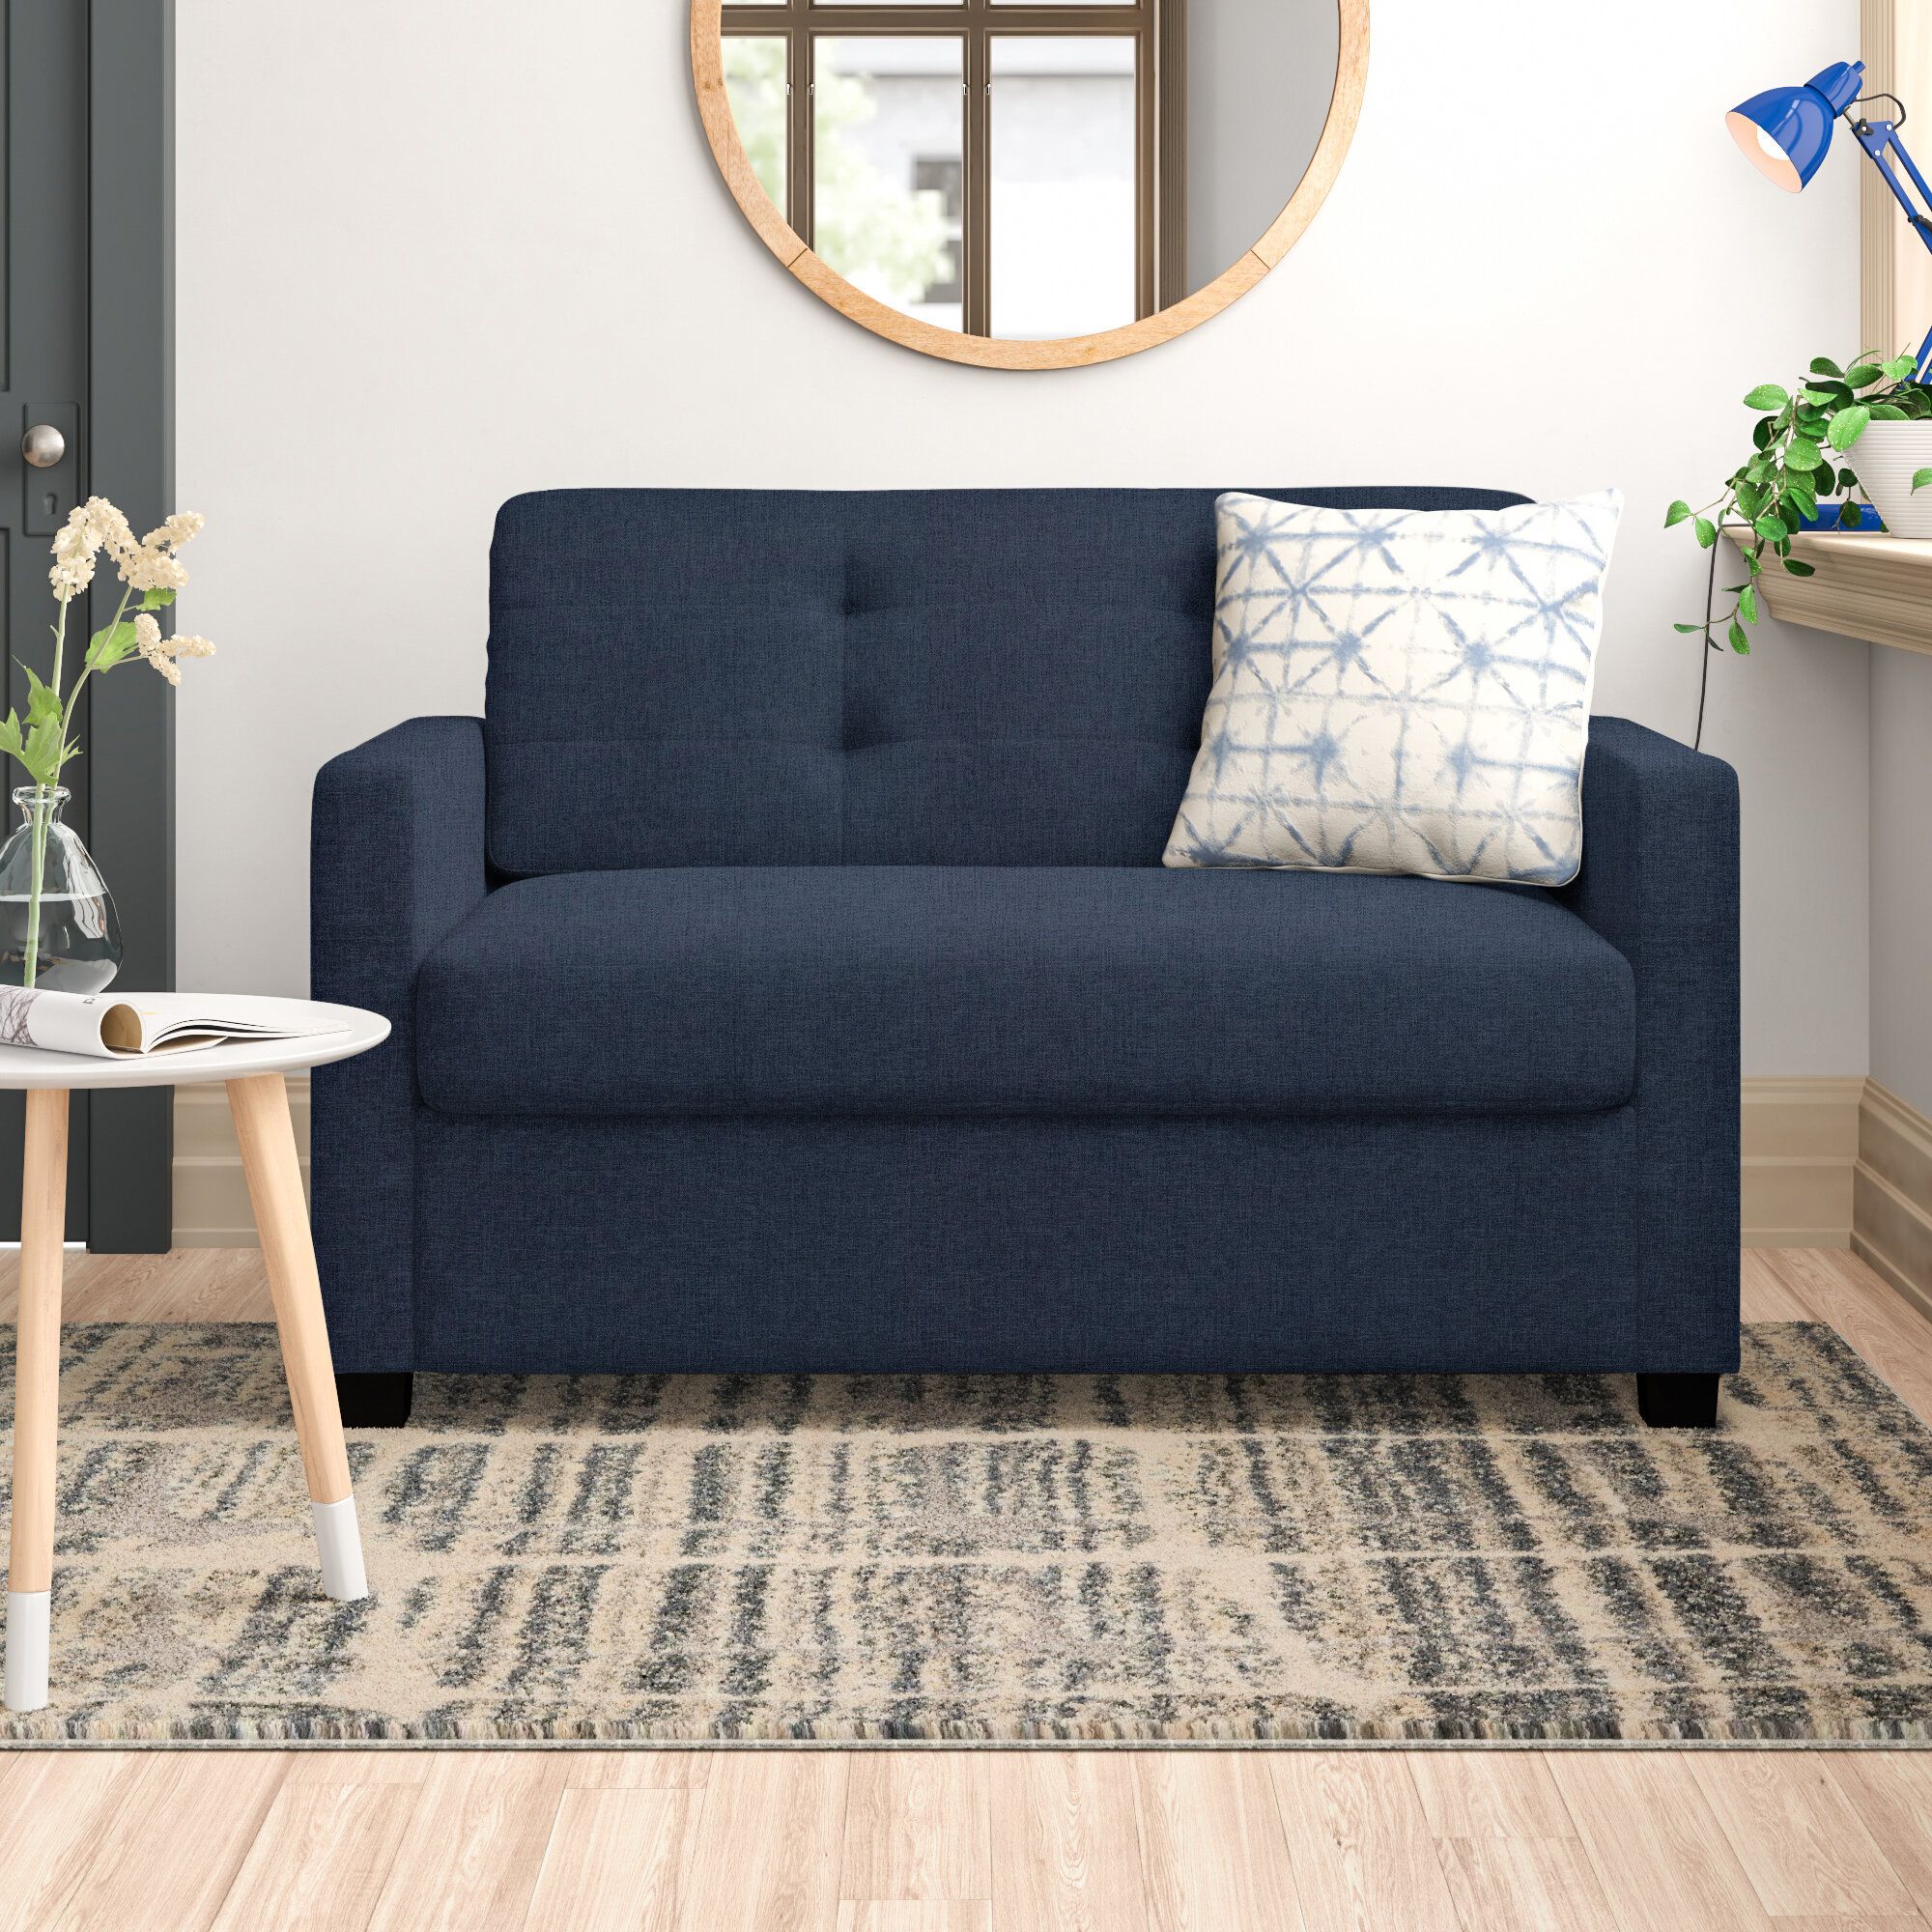 Wade Logan® Admon 54'' Upholstered Sofa & Reviews | Wayfair Within Navy Linen Coil Sofas (View 14 of 15)